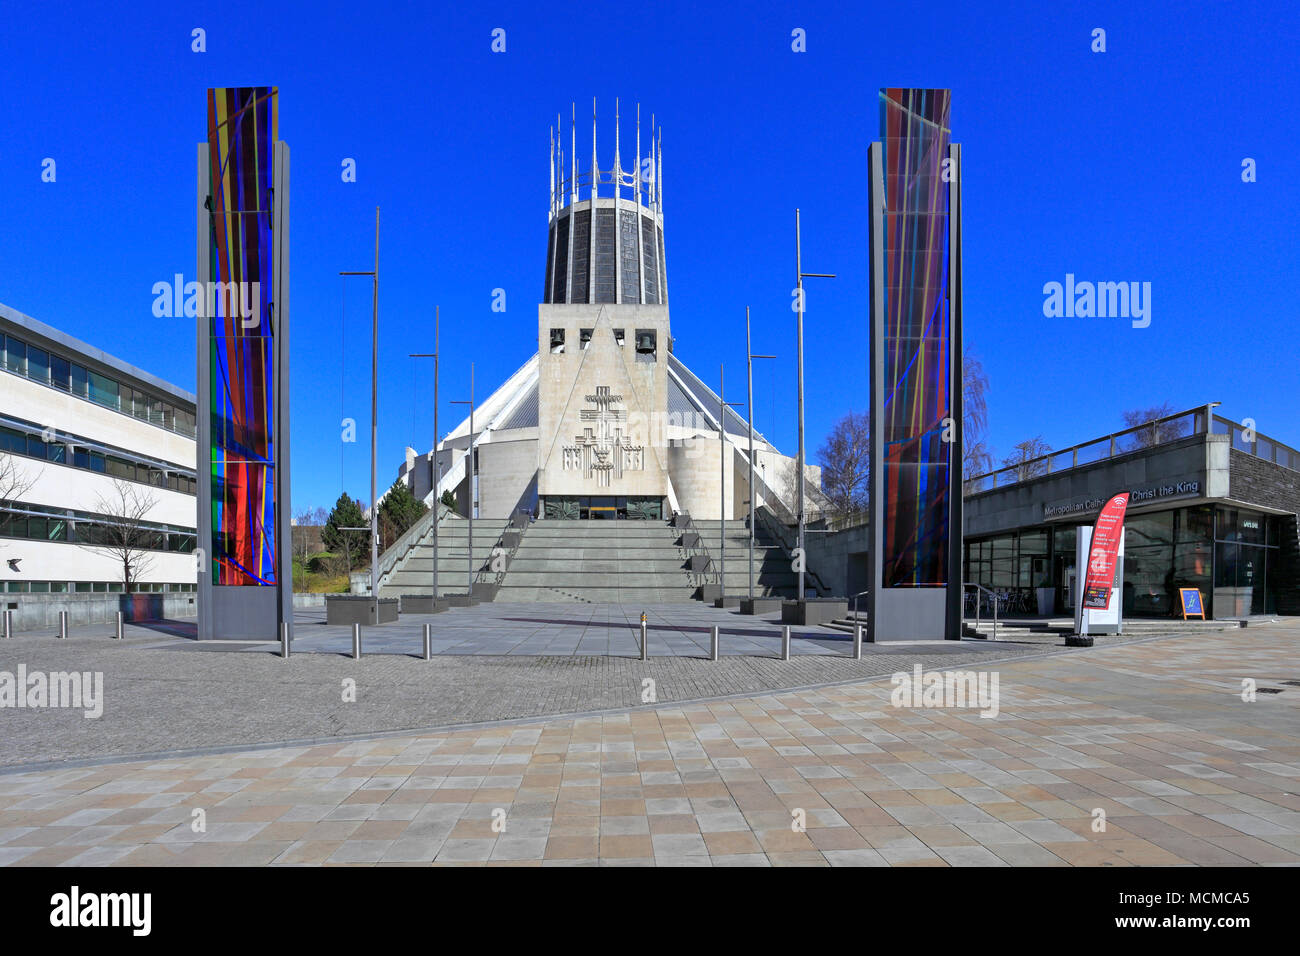 Liverpool Metropolitan Cathedral, officially known as the Metropolitan Cathedral of Christ the King, Liverpool, Merseyside, England, UK. Stock Photo